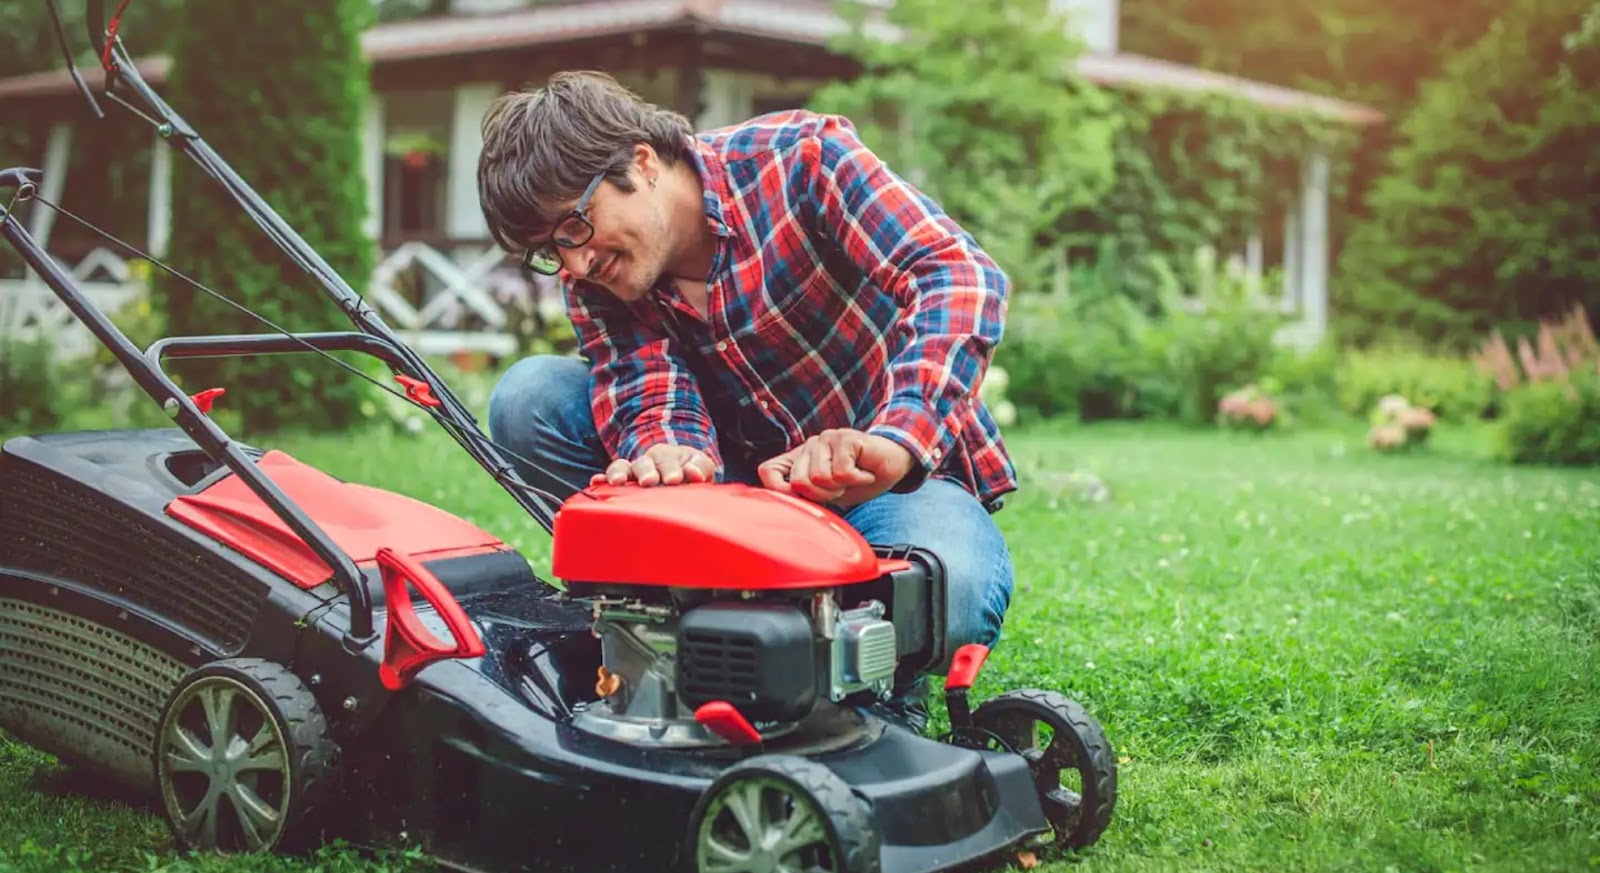 Maintenance Tips for Lawn Mowers